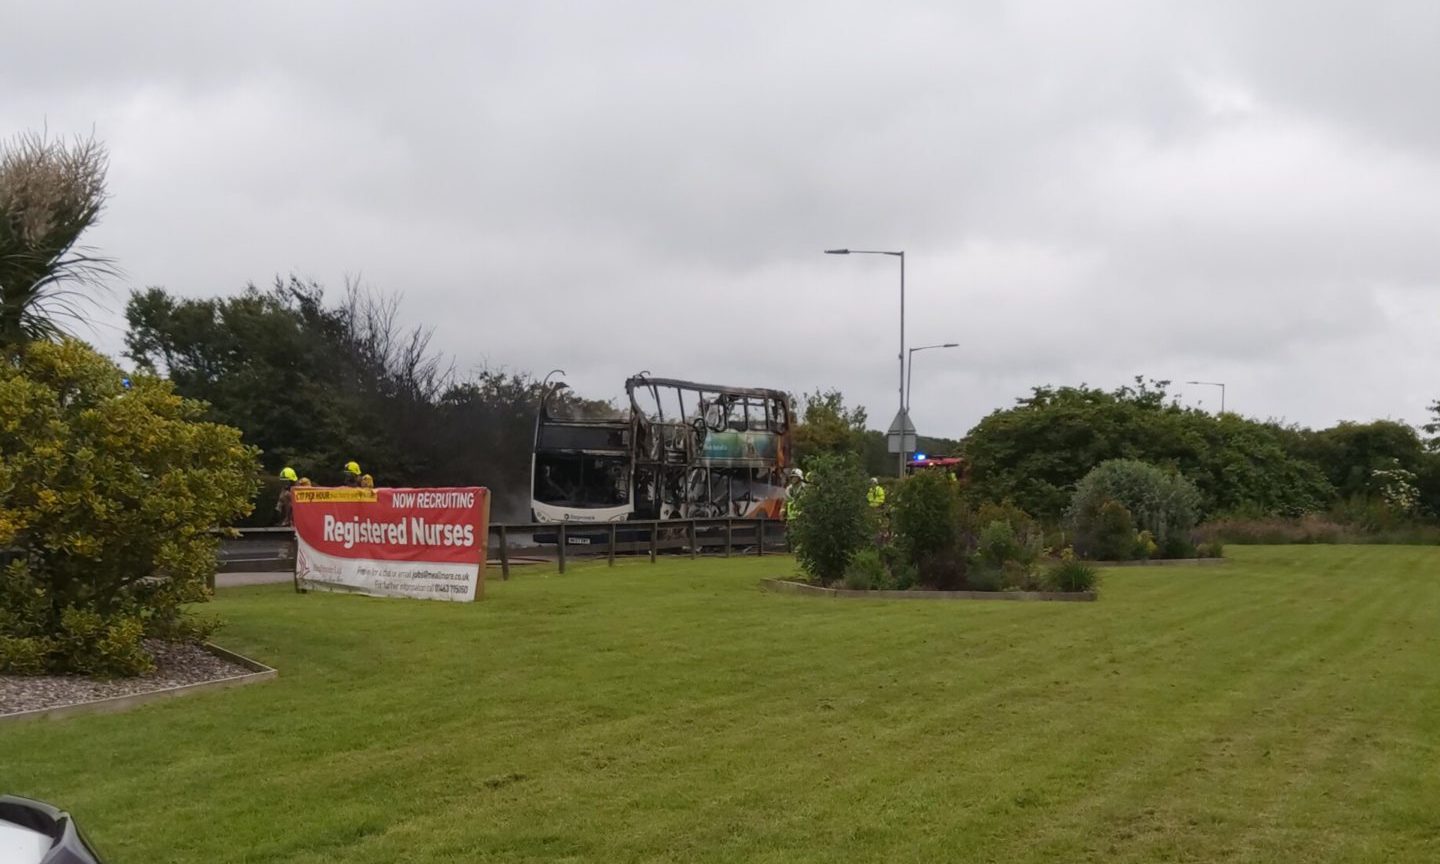 A bus on fire outside Crimond. Submitted by Michael Best.